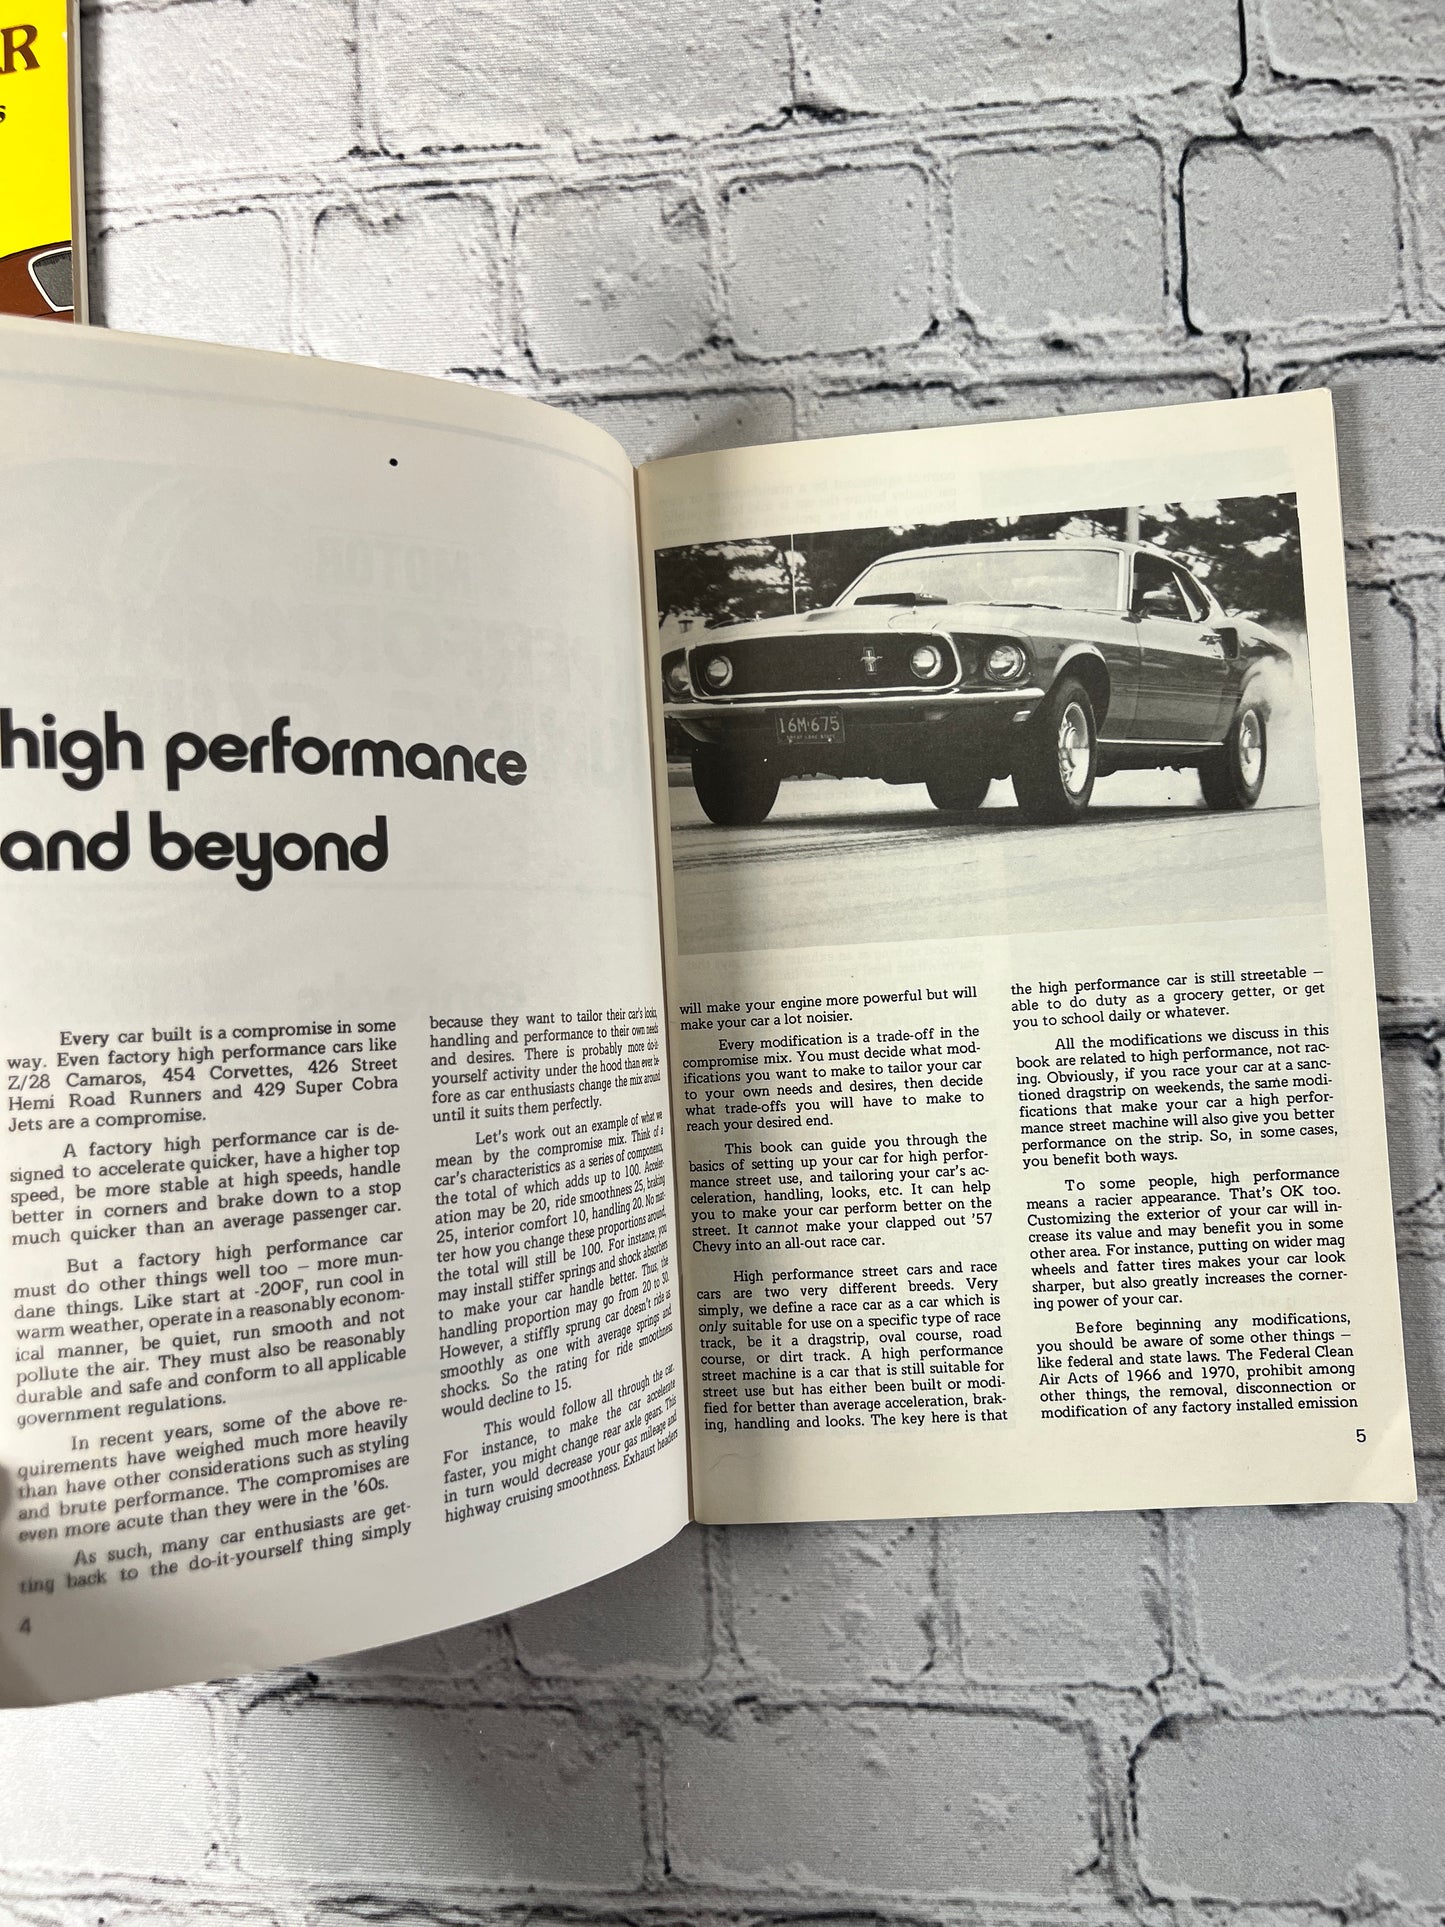 Motor Hi-Performance Tuning Guide [1973] & Auto Problem Solvers [1976]